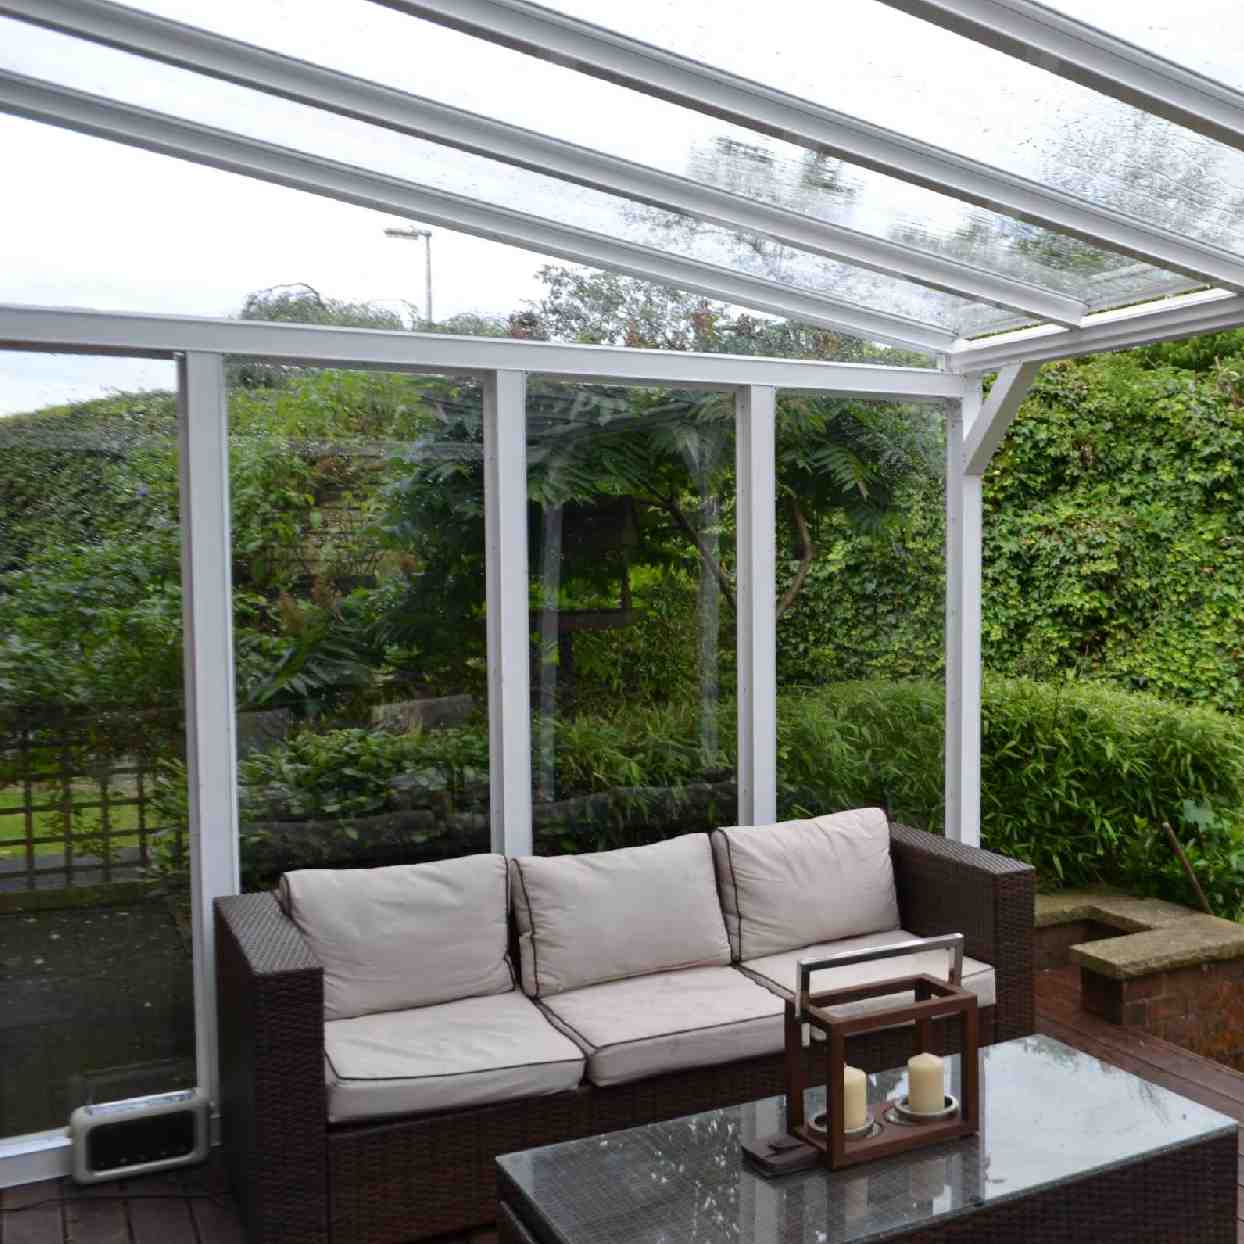 Buy Omega Verandah White with 6mm Glass Clear Plate Polycarbonate Glazing - 3.5m (W) x 2.0m (P), (3) Supporting Posts online today